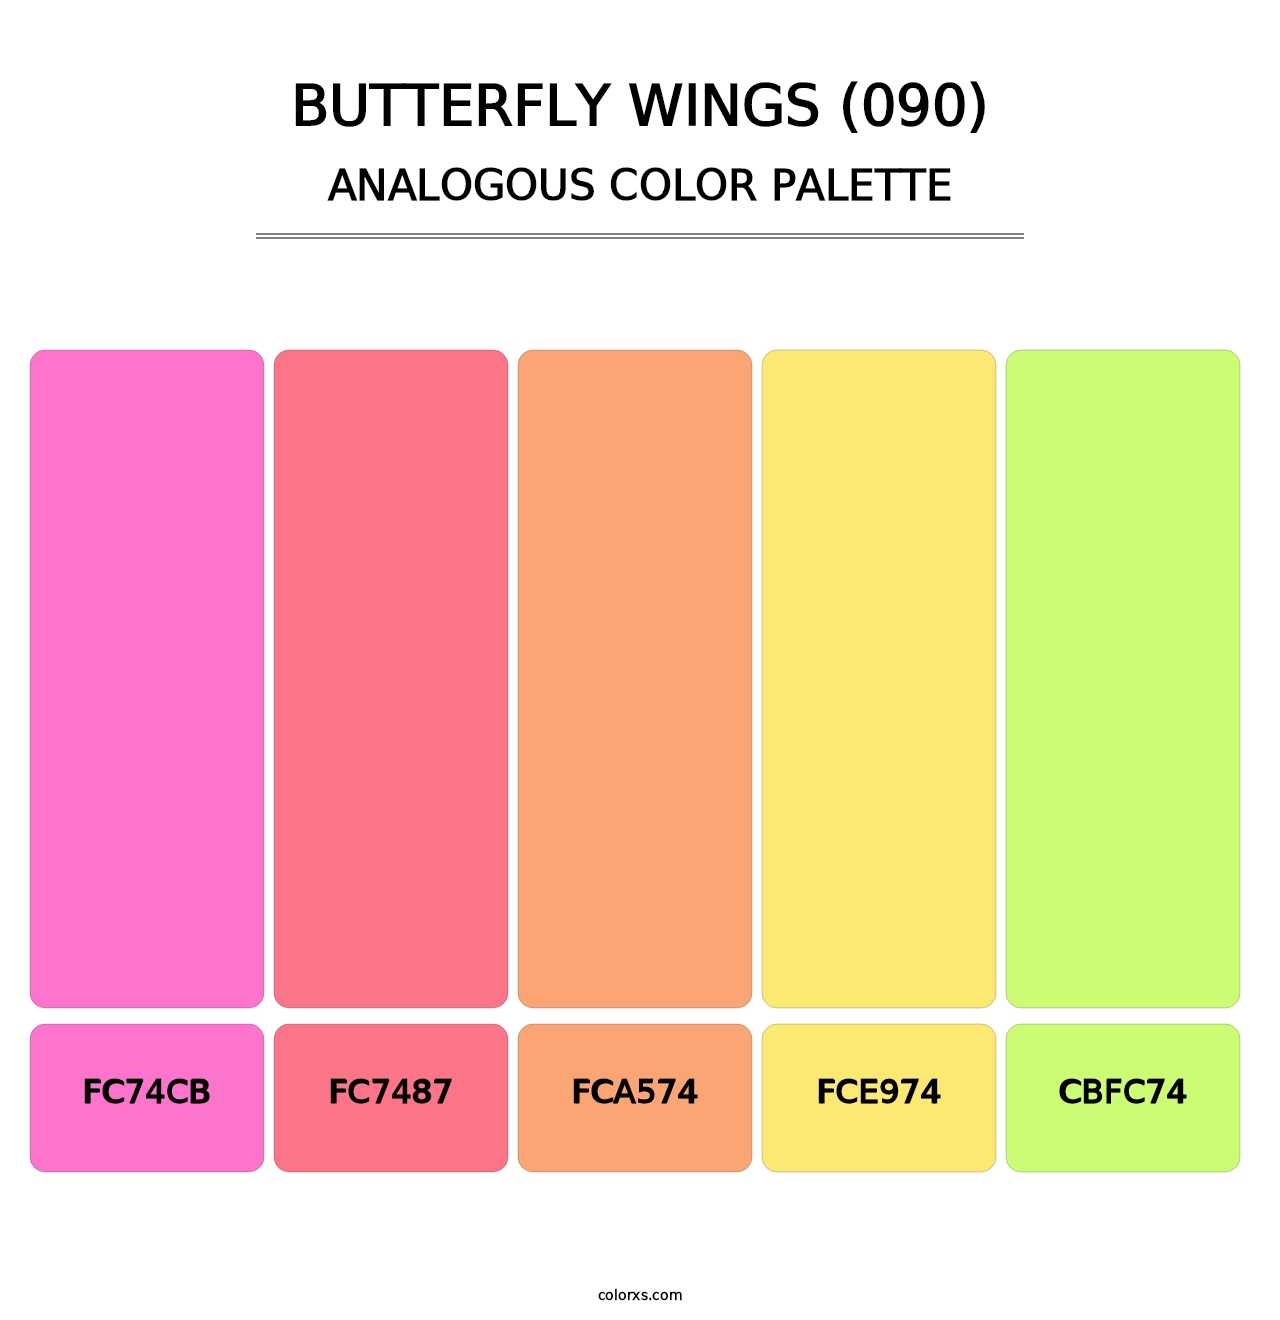 Butterfly Wings (090) - Analogous Color Palette